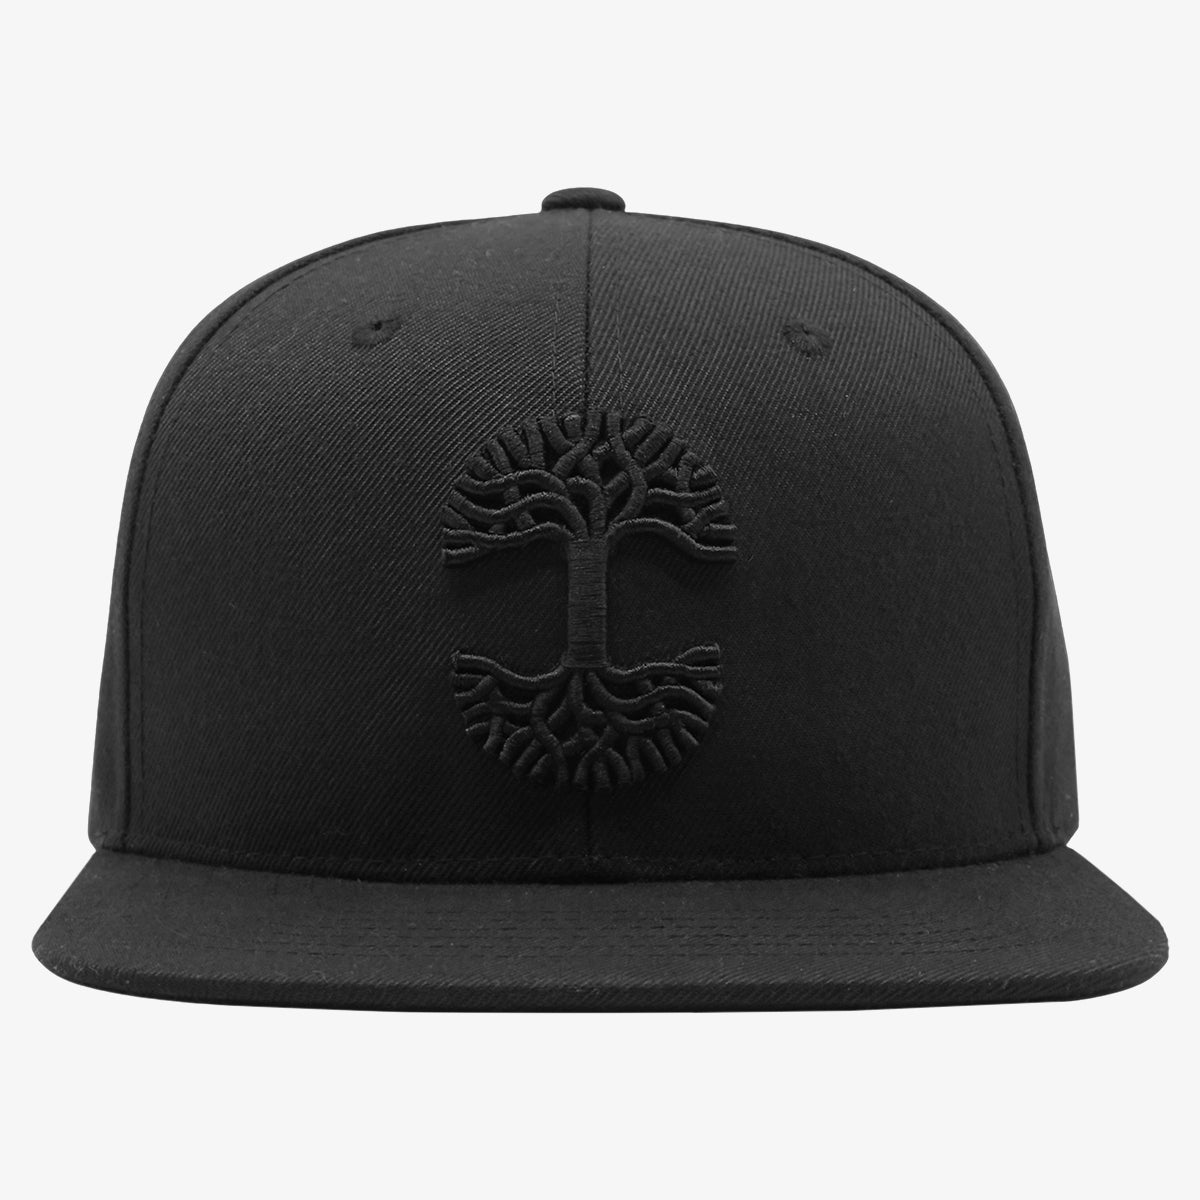 Black cap with black embroidered Oaklandish tree logo on the front.